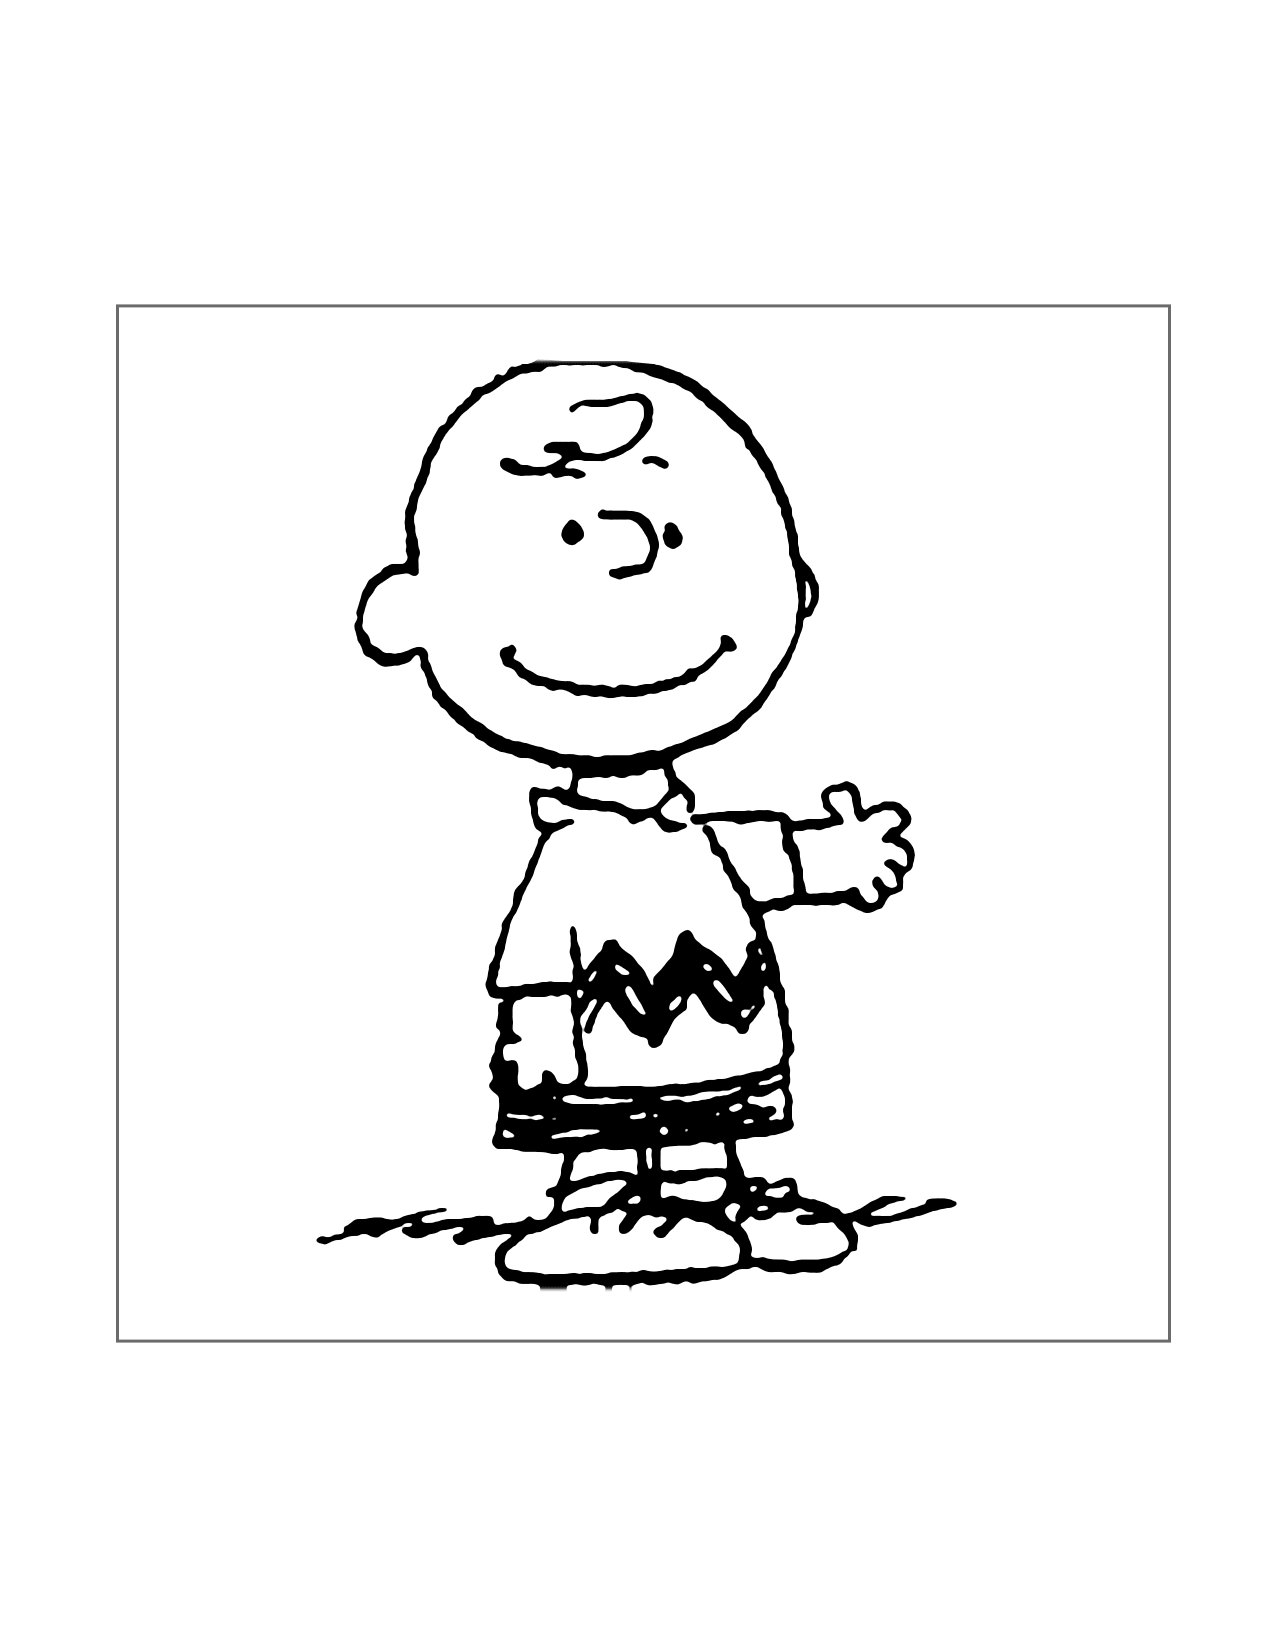 Charlie brown pages â printable pages